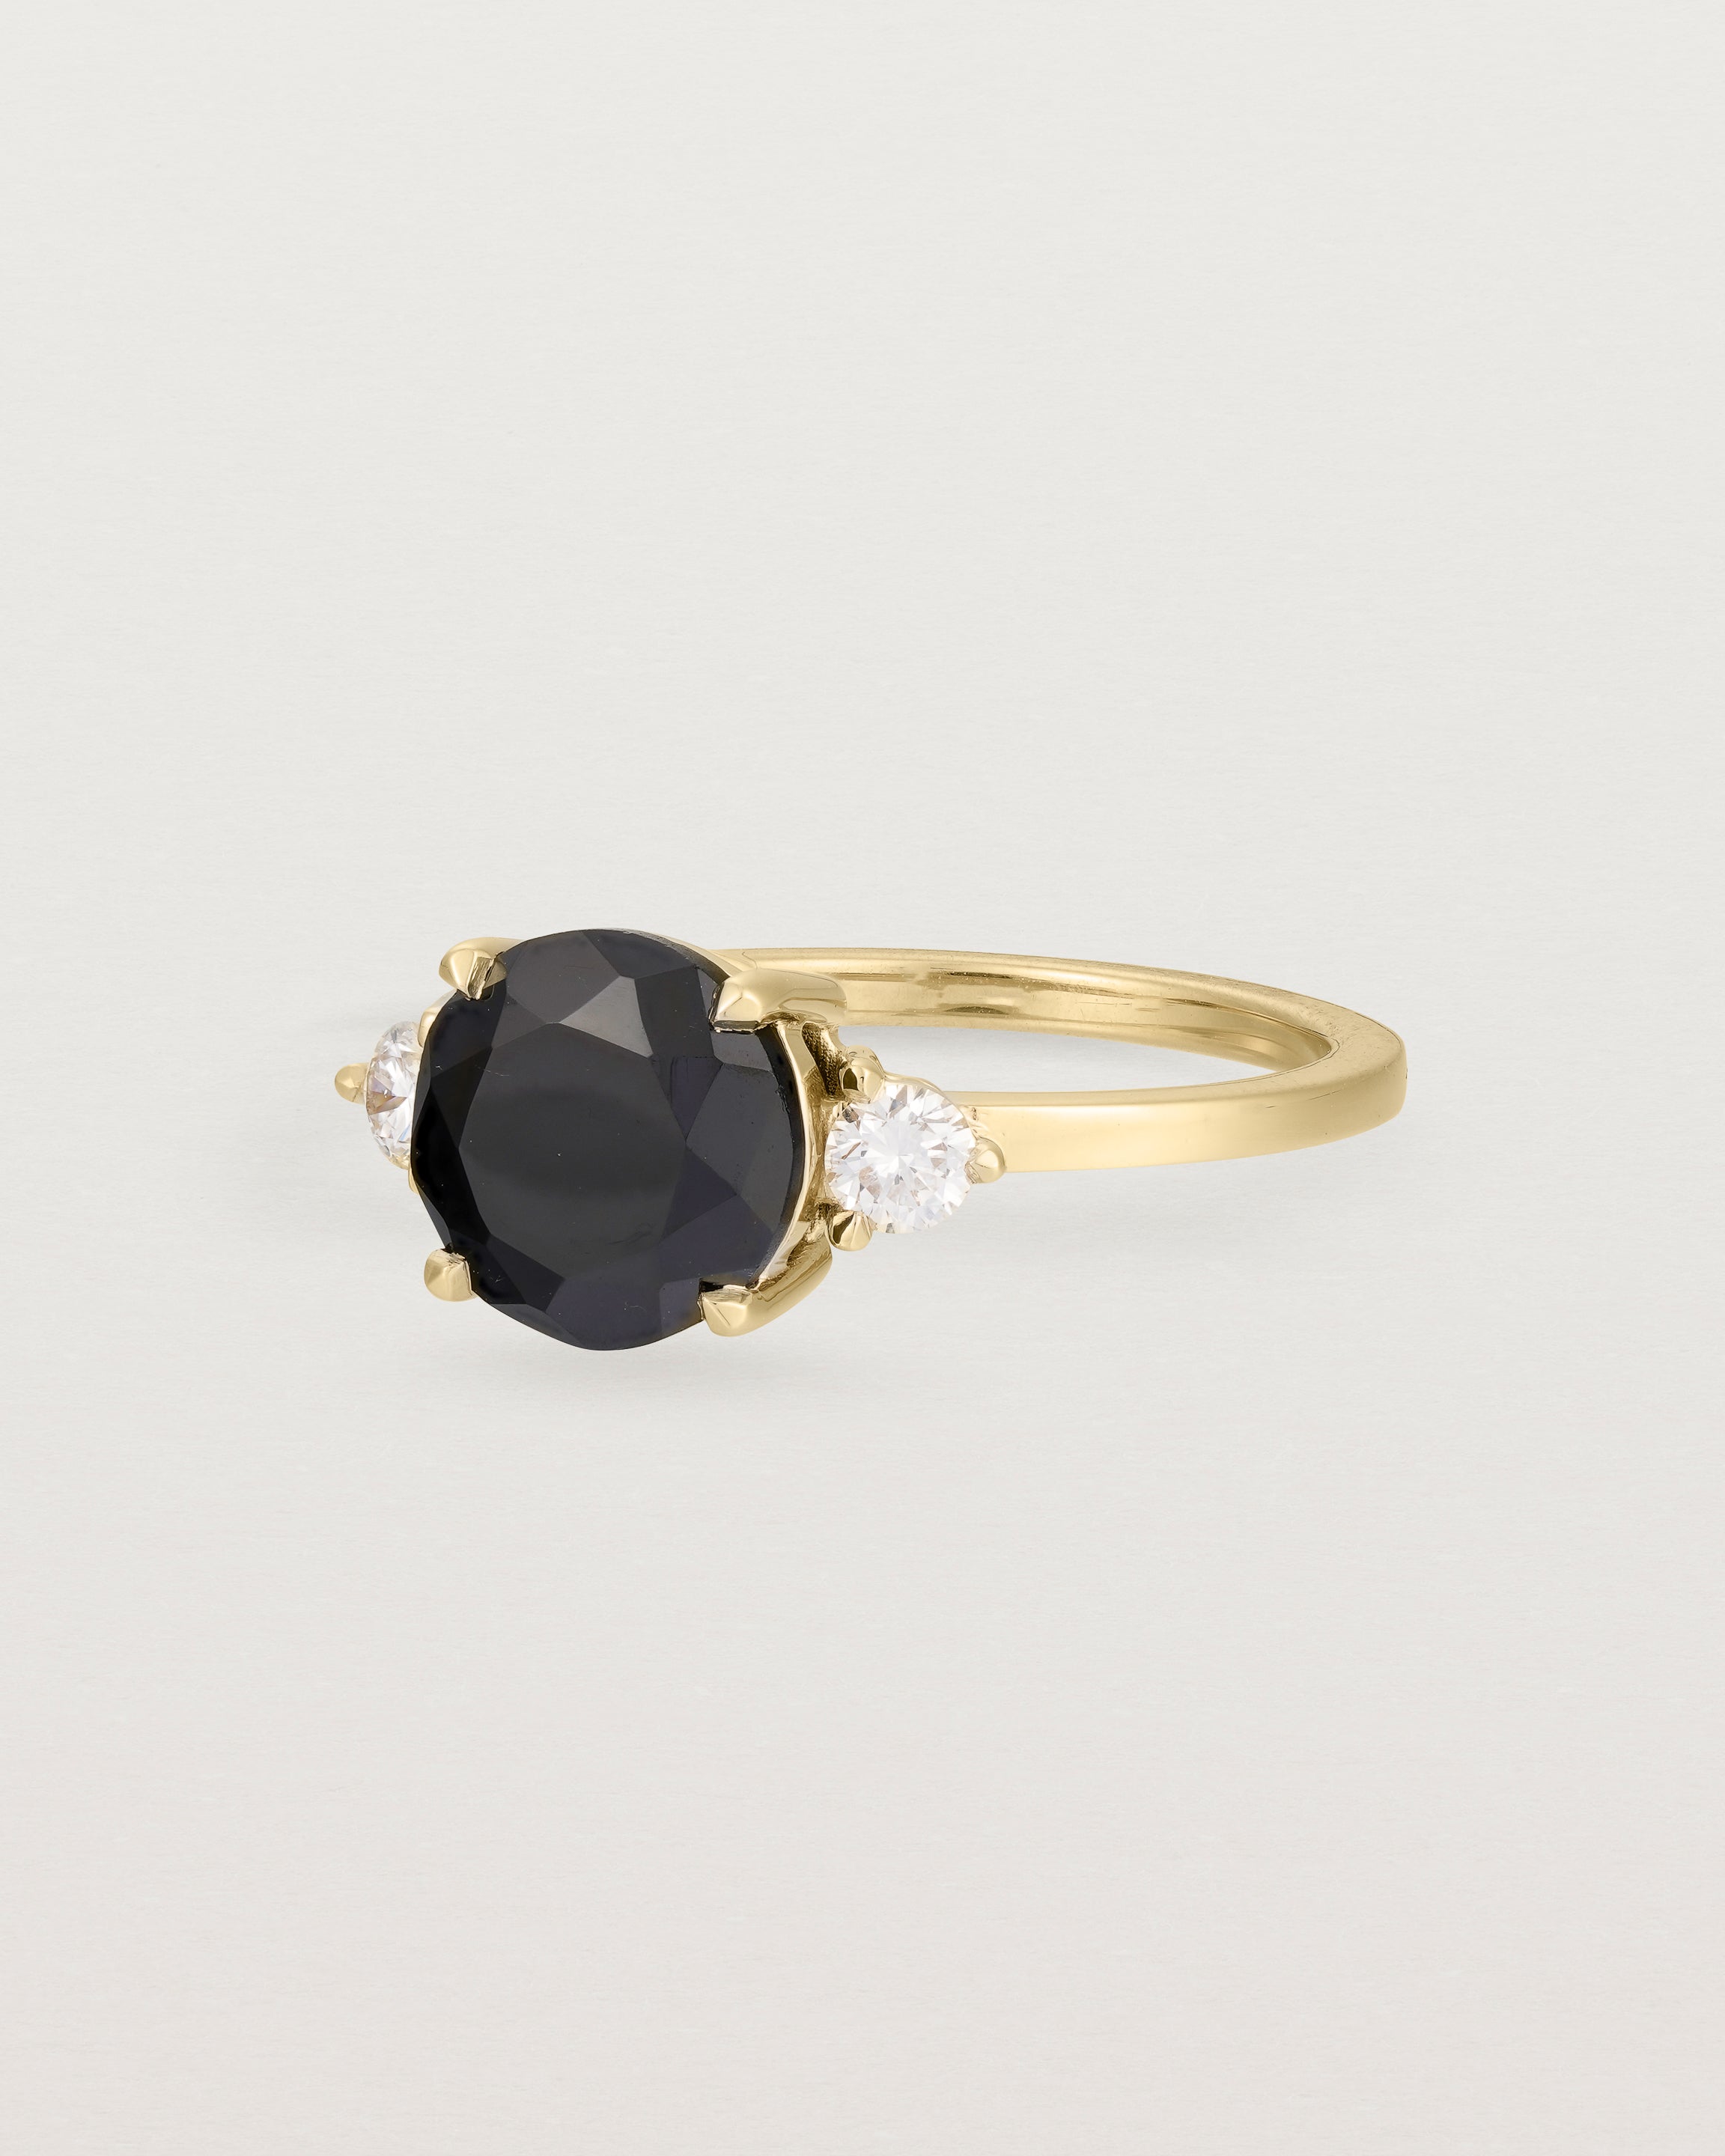 Angled view of the Una Round Trio Ring | Black Spinel & Diamonds | Yellow Gold.